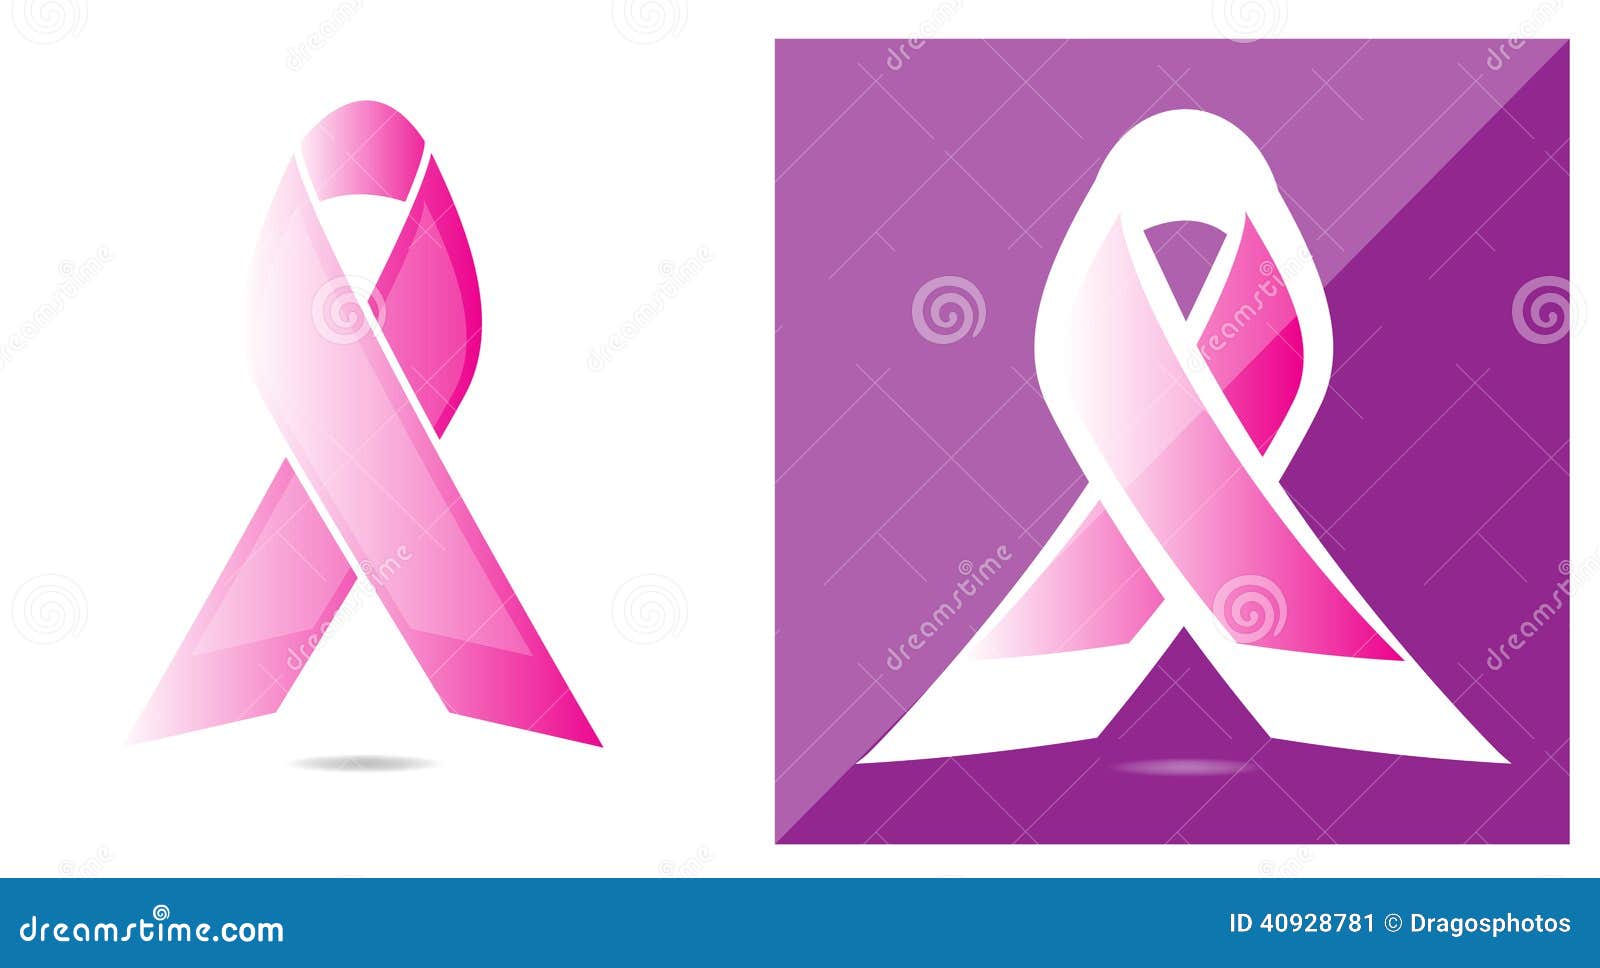 Breast Shapes Icons In Flat Style. Illustration Royalty Free SVG, Cliparts,  Vectors, and Stock Illustration. Image 56382090.